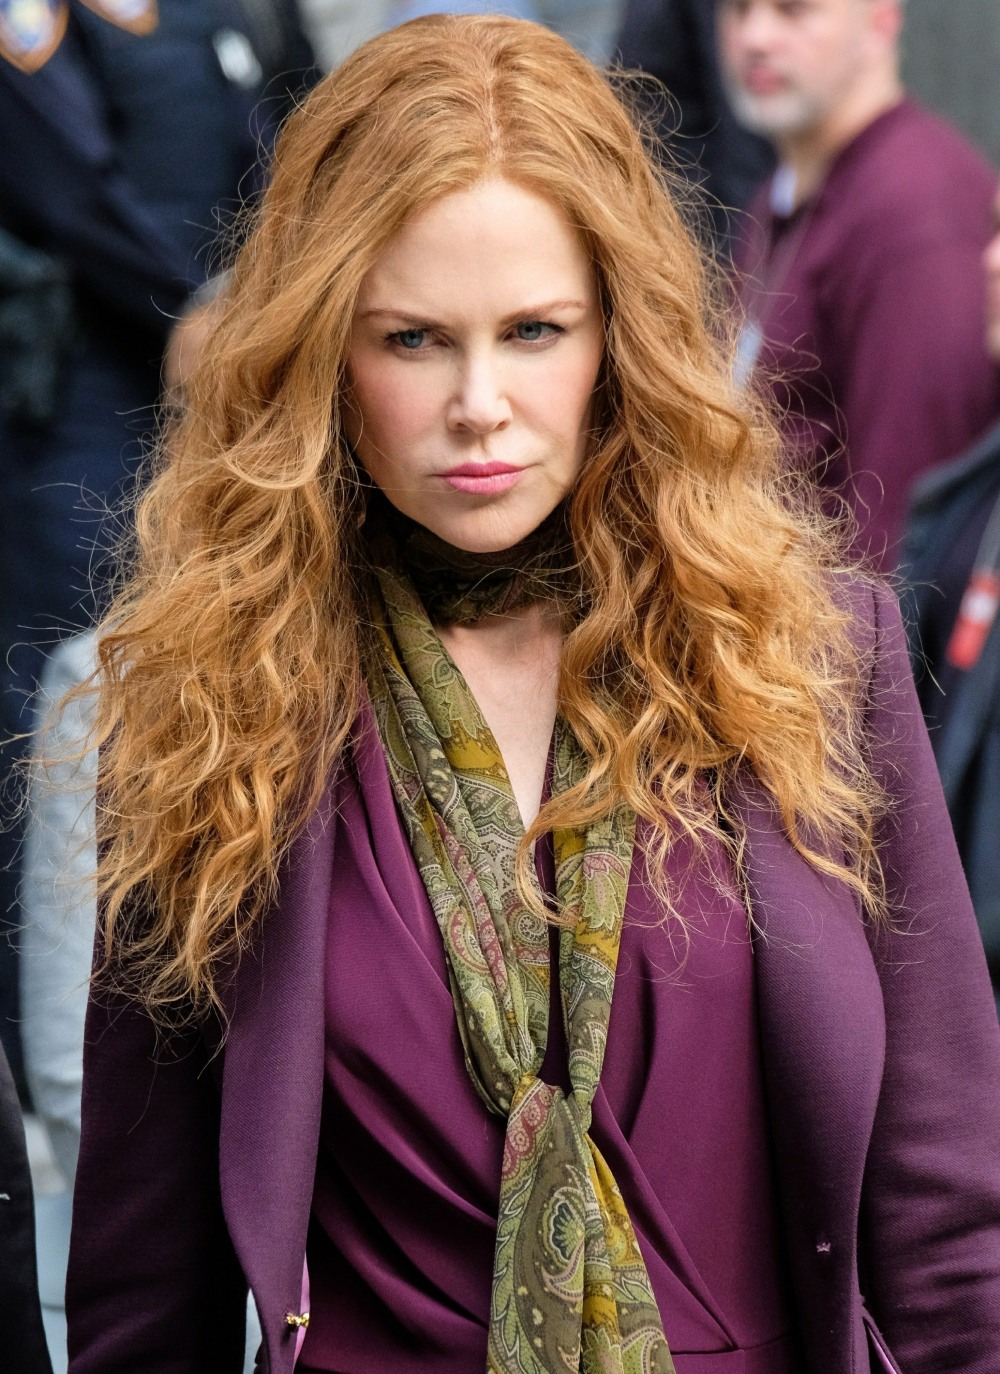 Nicole Kidman films with Hugh Grant and Donald Sutherland in NYC